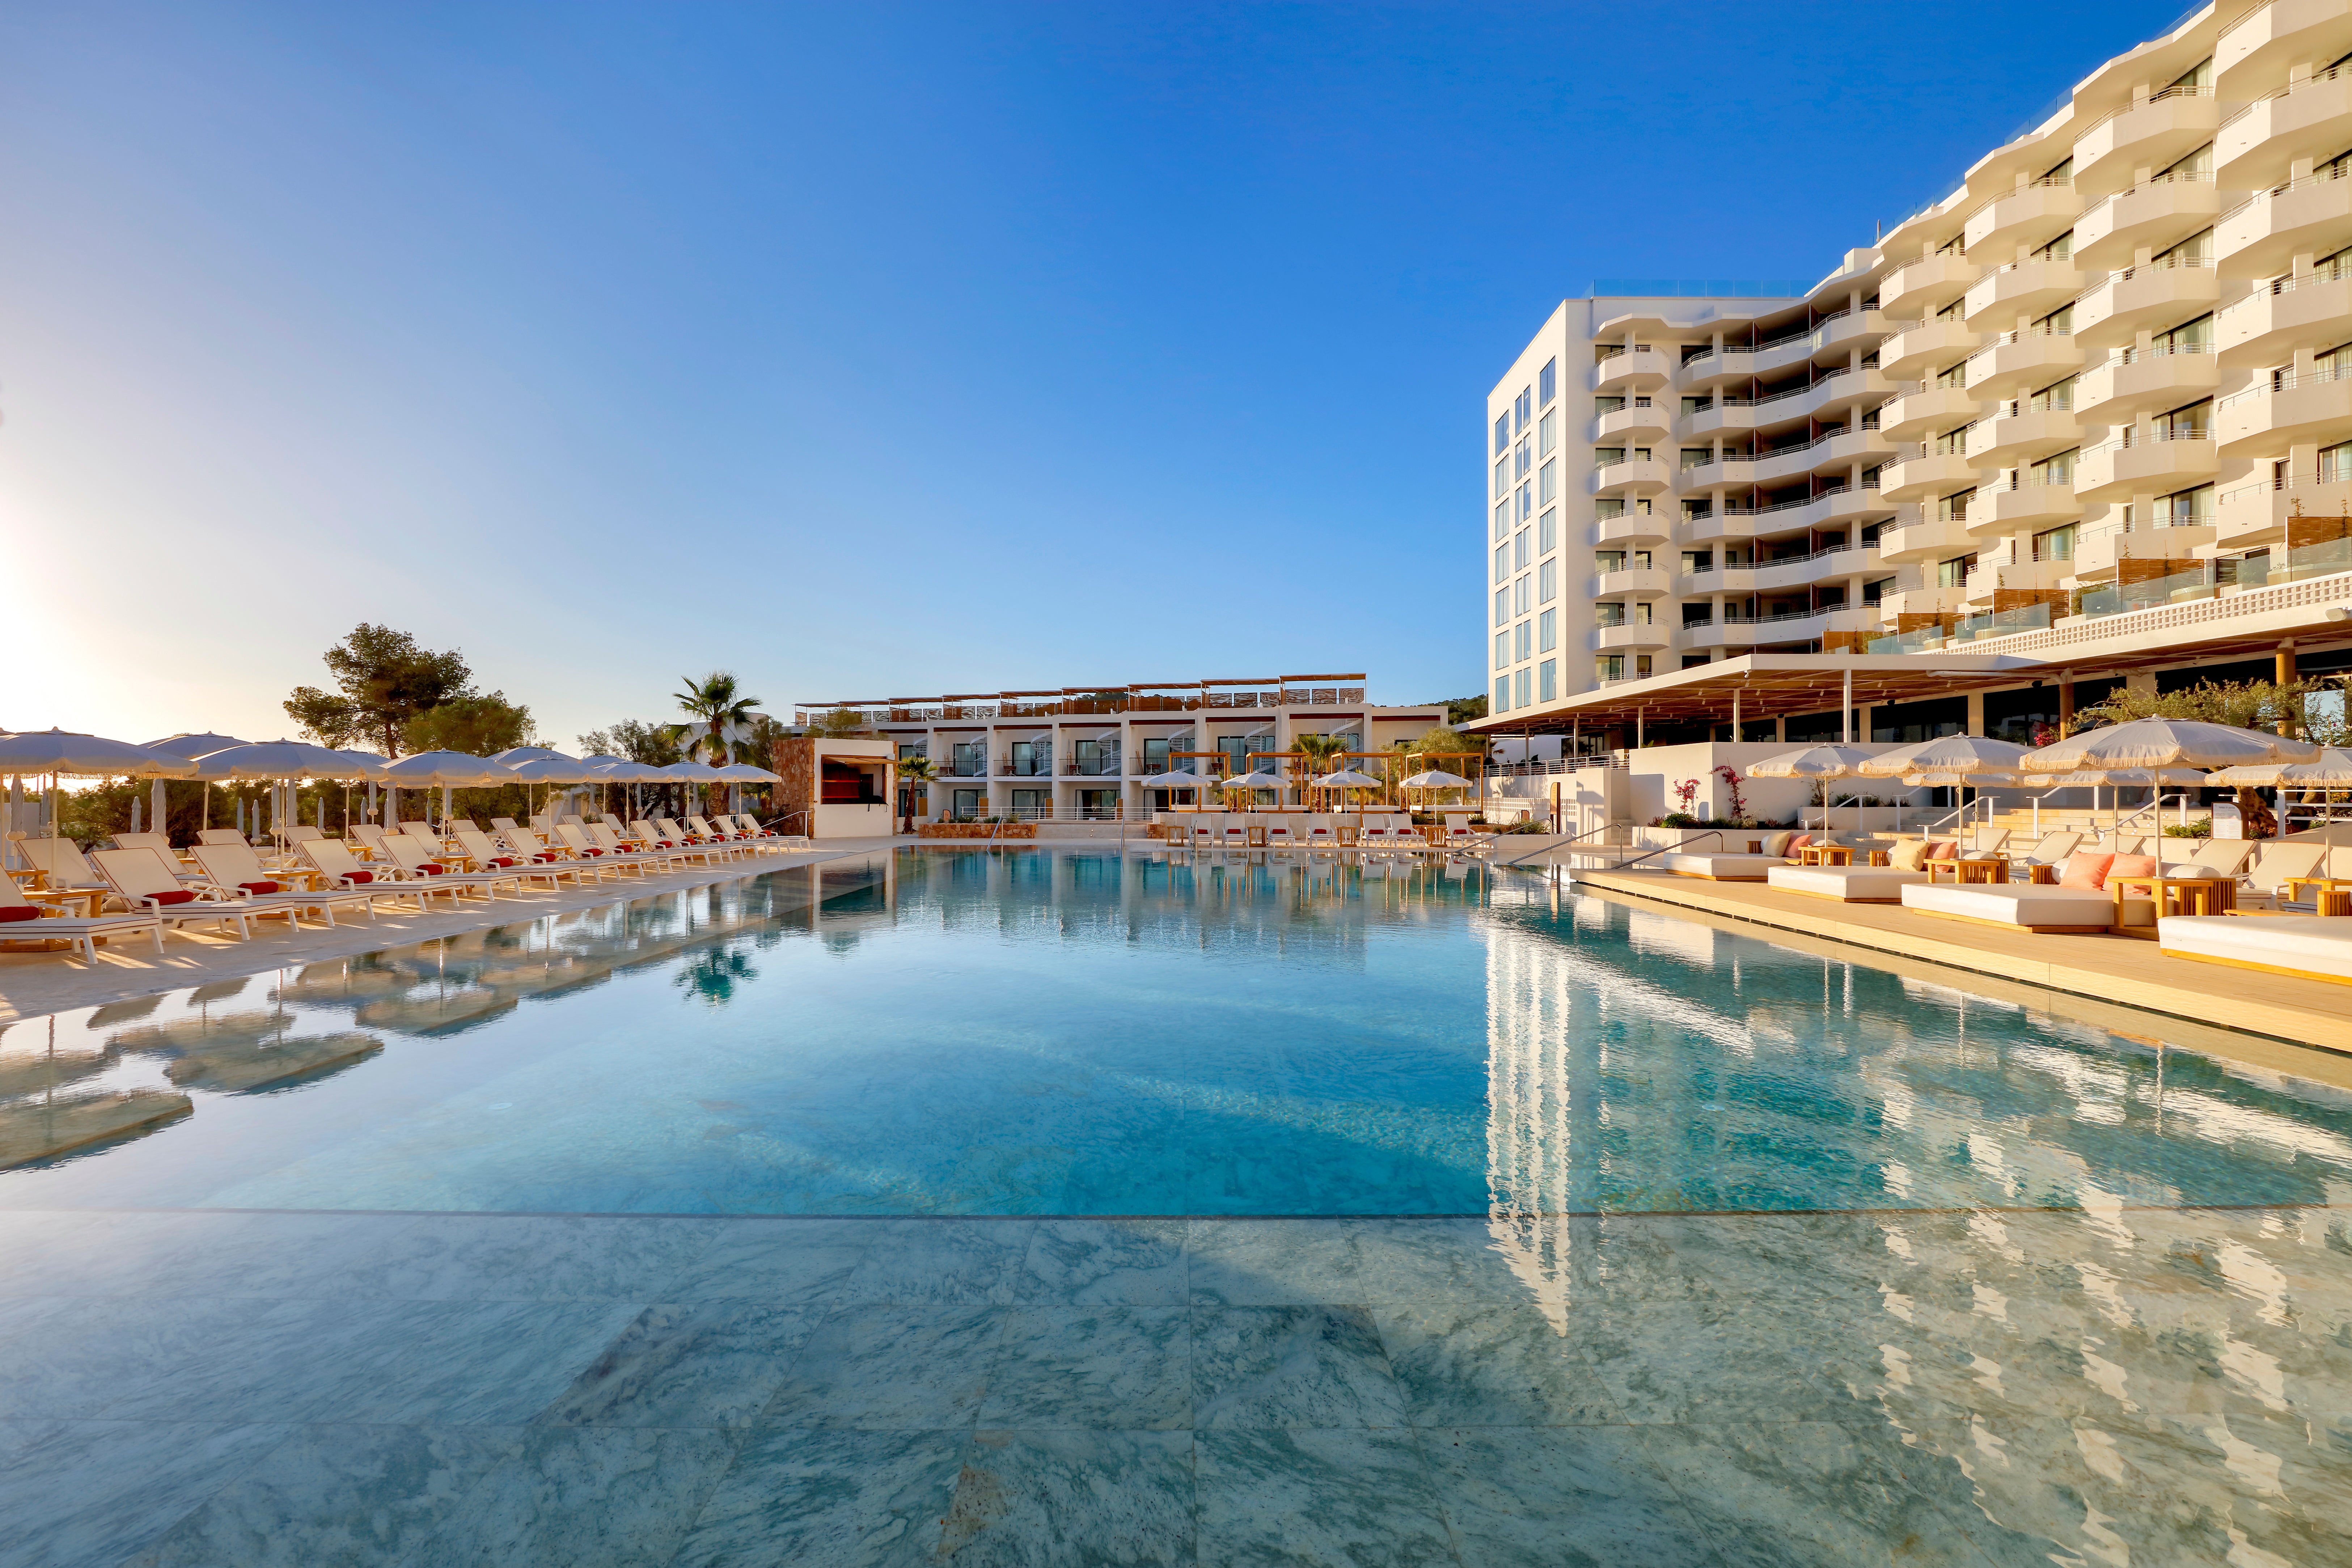 Unwind in style at TRS Ibiza Hotel, with its rooftop infinity pool and spectacular spa